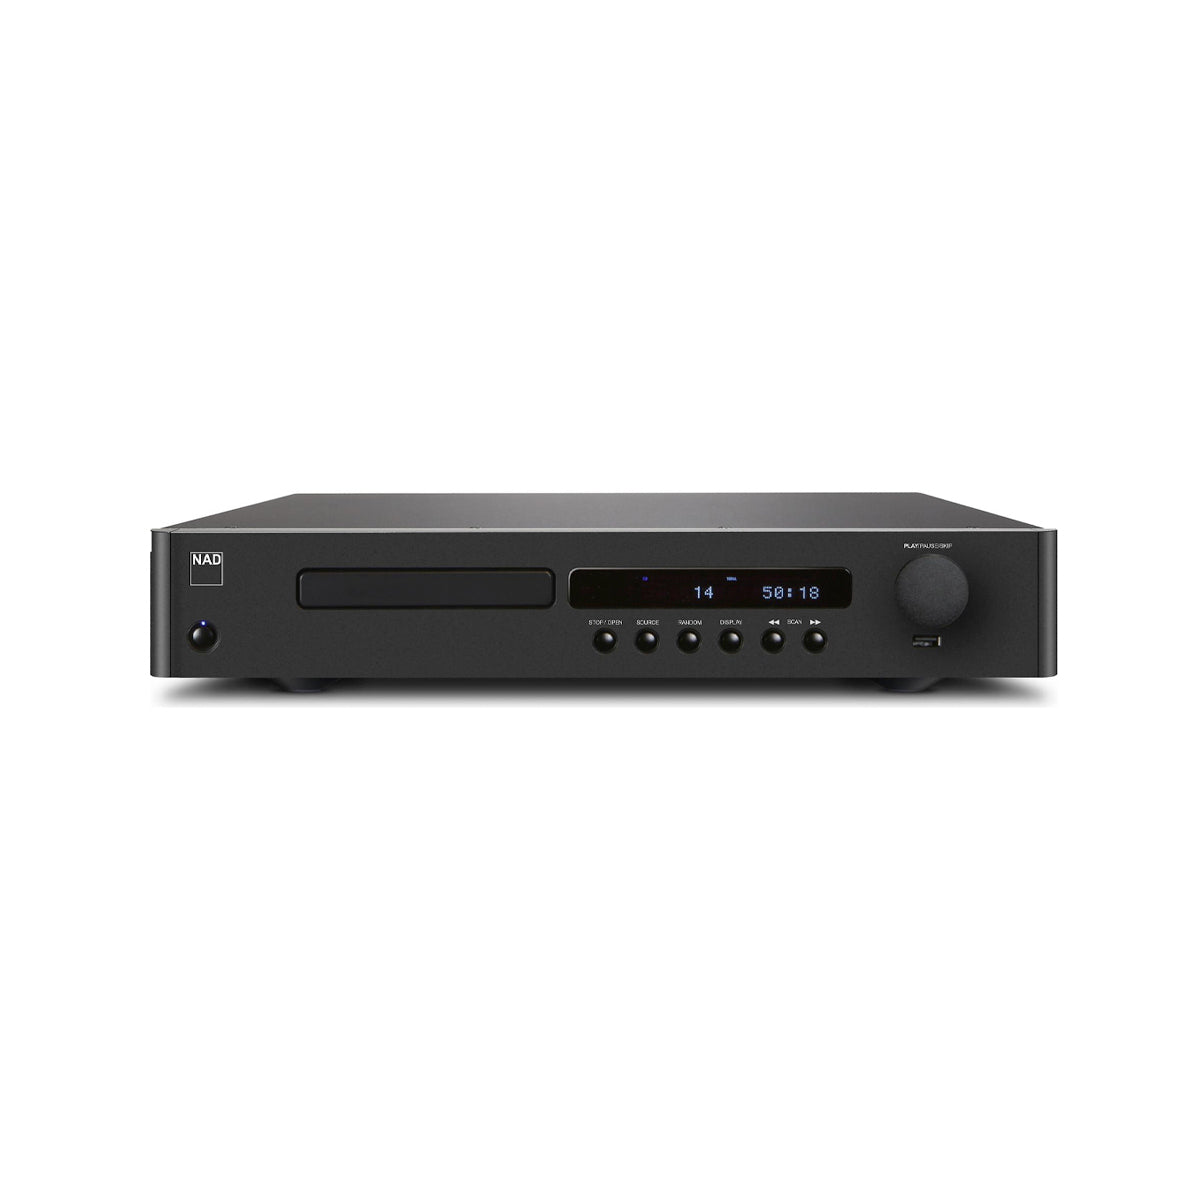 NAD C568 CD Player with USB - The Audio Experts